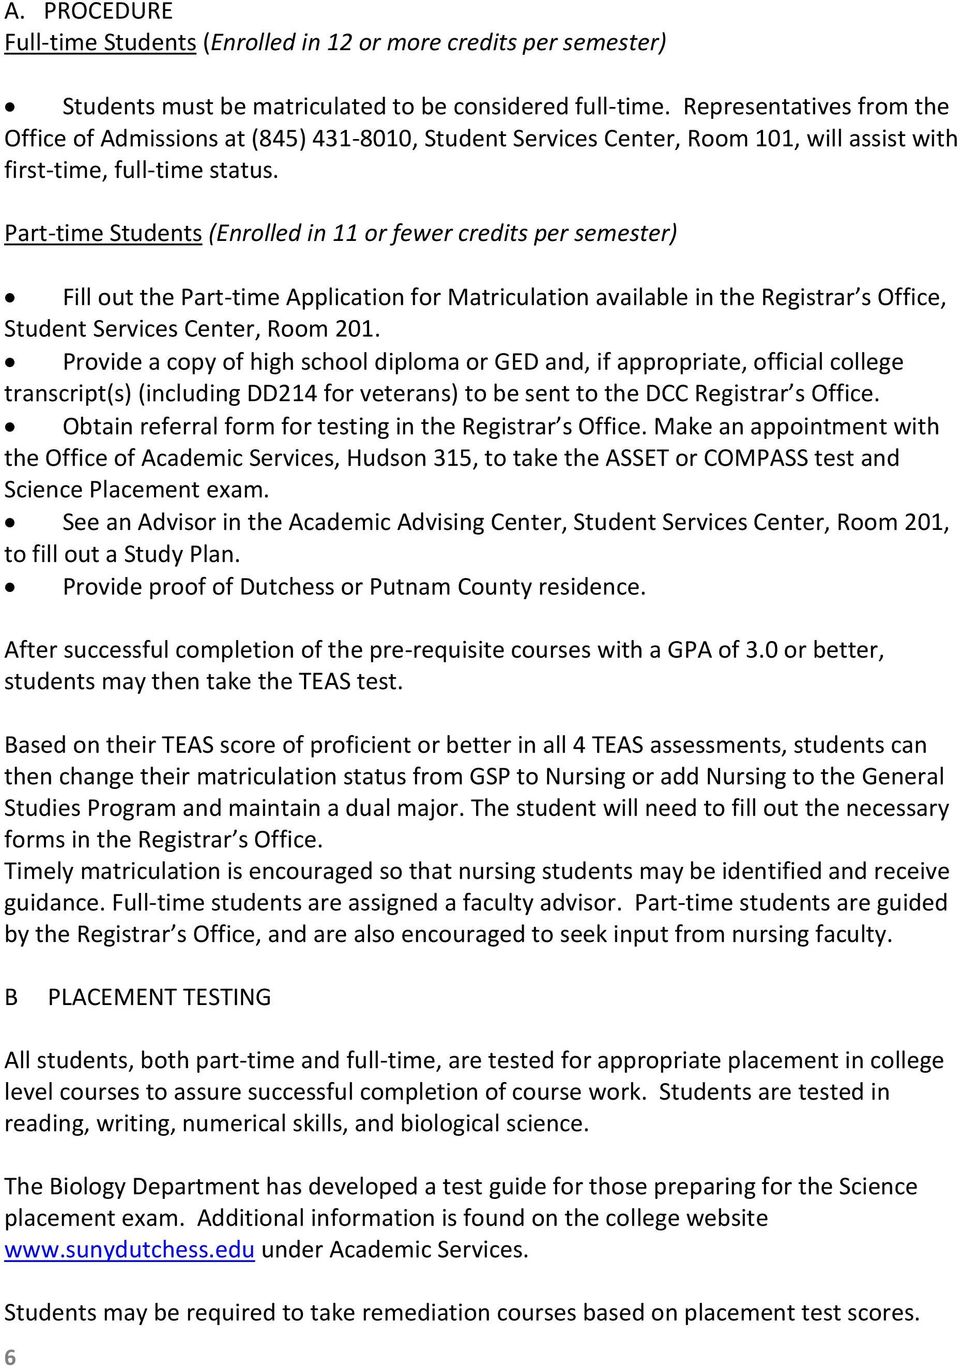 Part-time Students (Enrolled in 11 or fewer credits per semester) Fill out the Part-time Application for Matriculation available in the Registrar s Office, Student Services Center, Room 201.